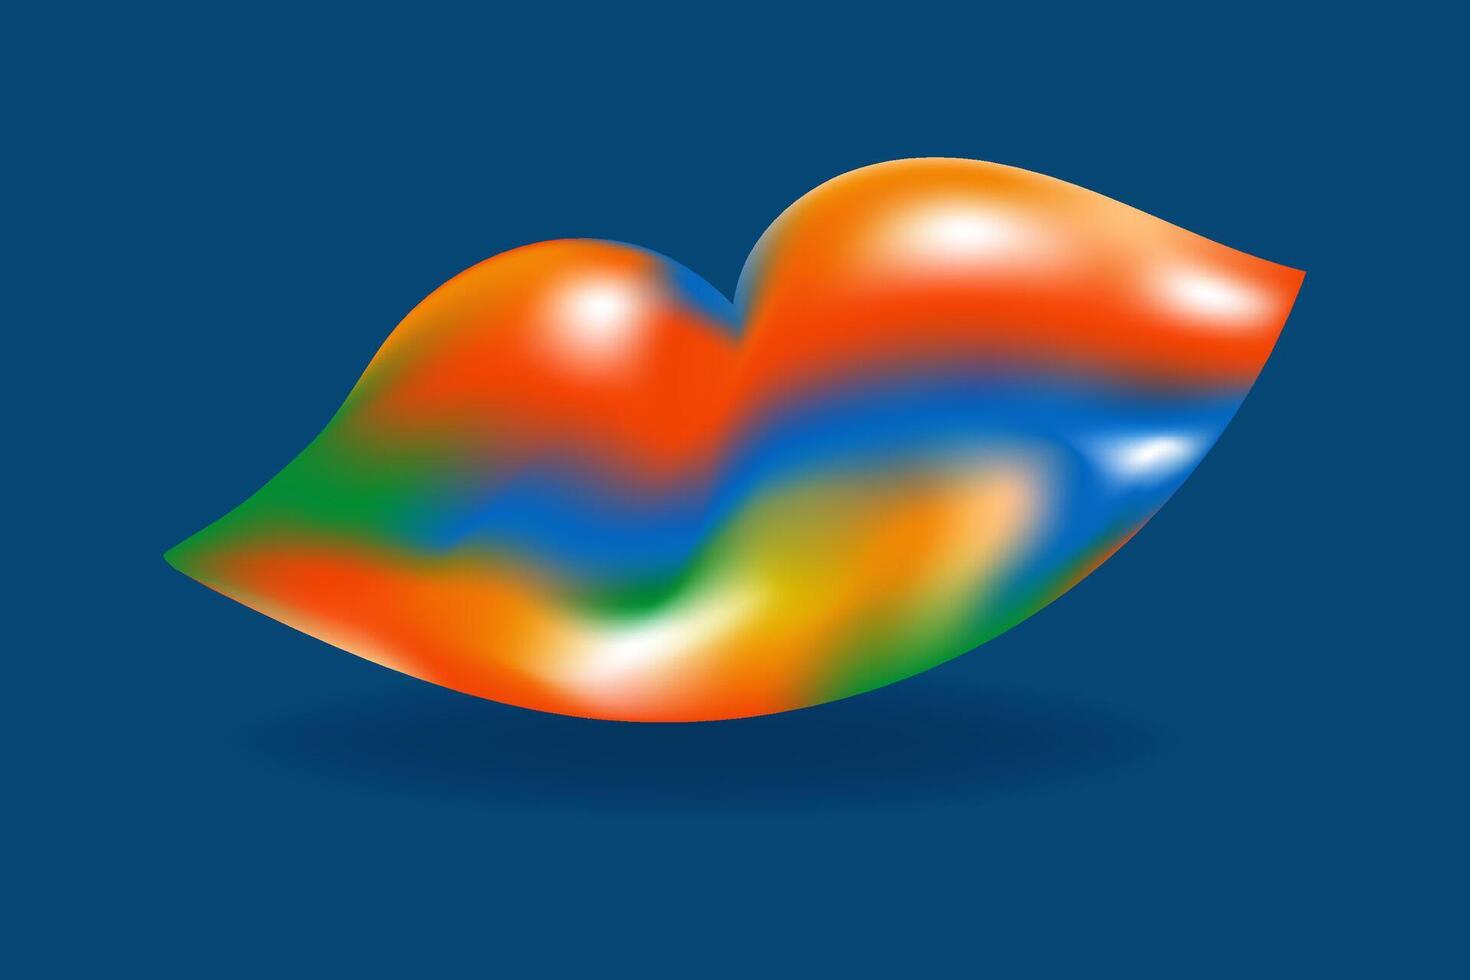 3D vector form of lips in rainbow heat map colors gradient on blue background. Trendy futuristic element perfect for abstract designs, web, print, media